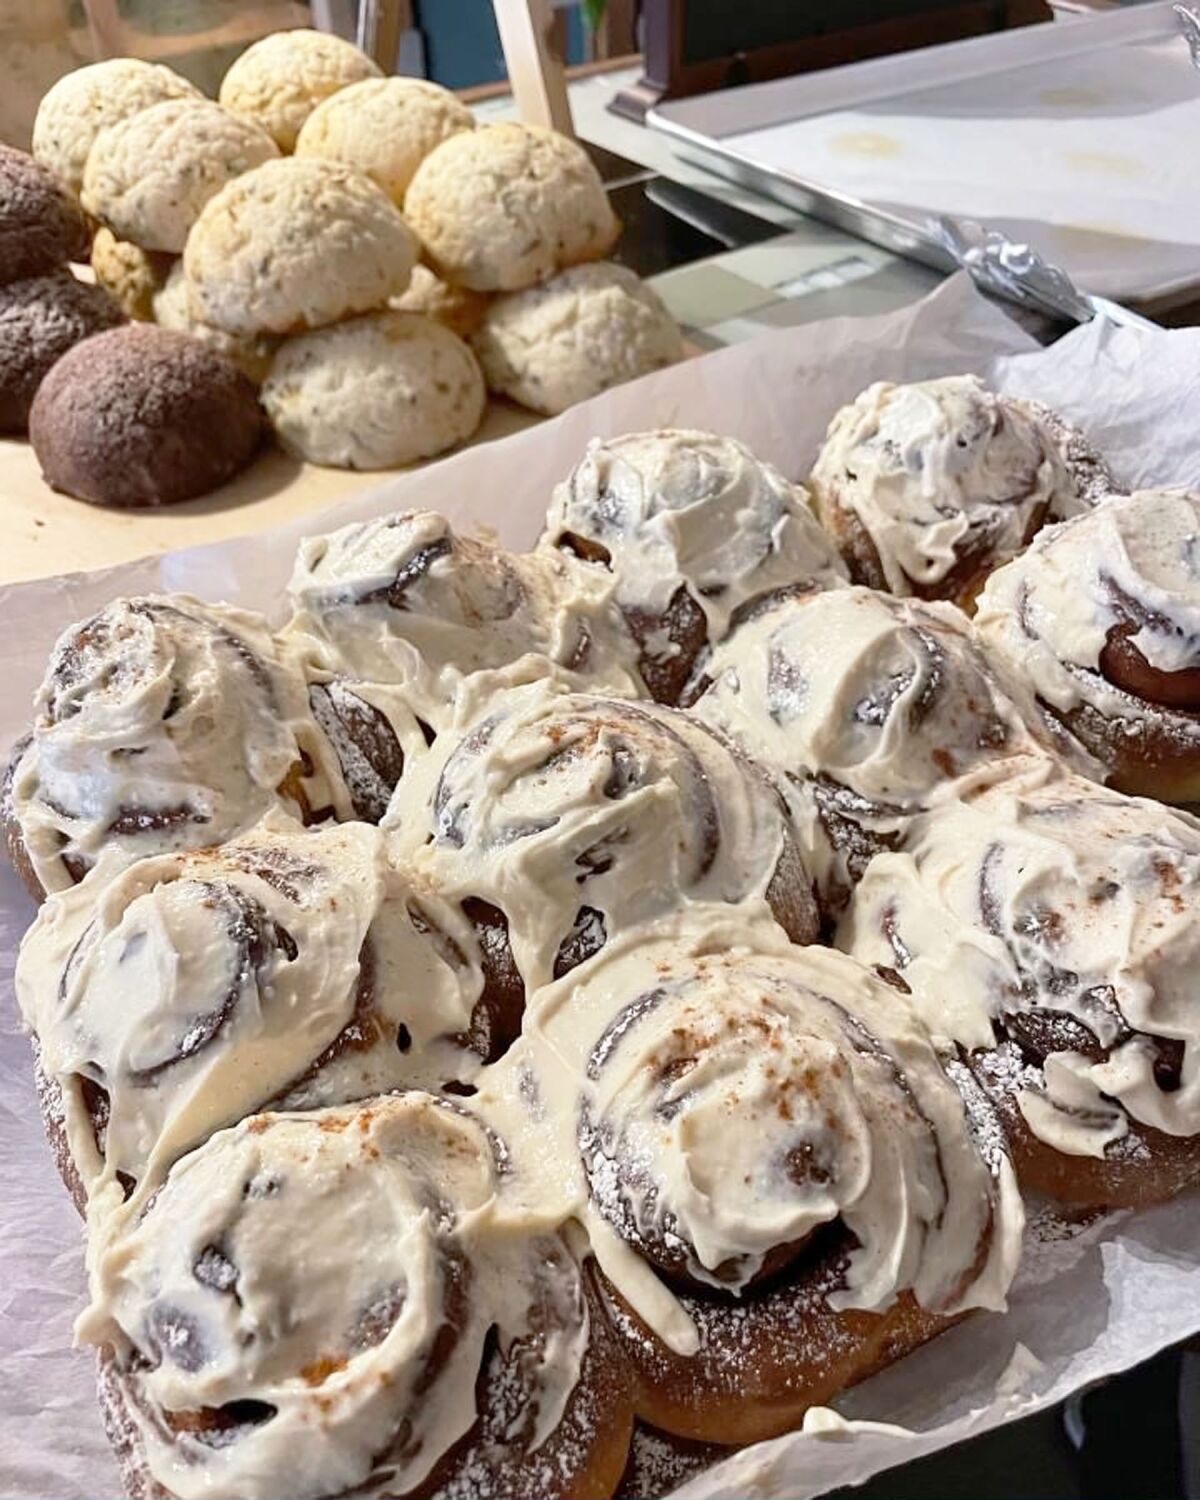 Sweet buns covered in frosting are among the items sold at Wildwood Flour in Pacific Beach.